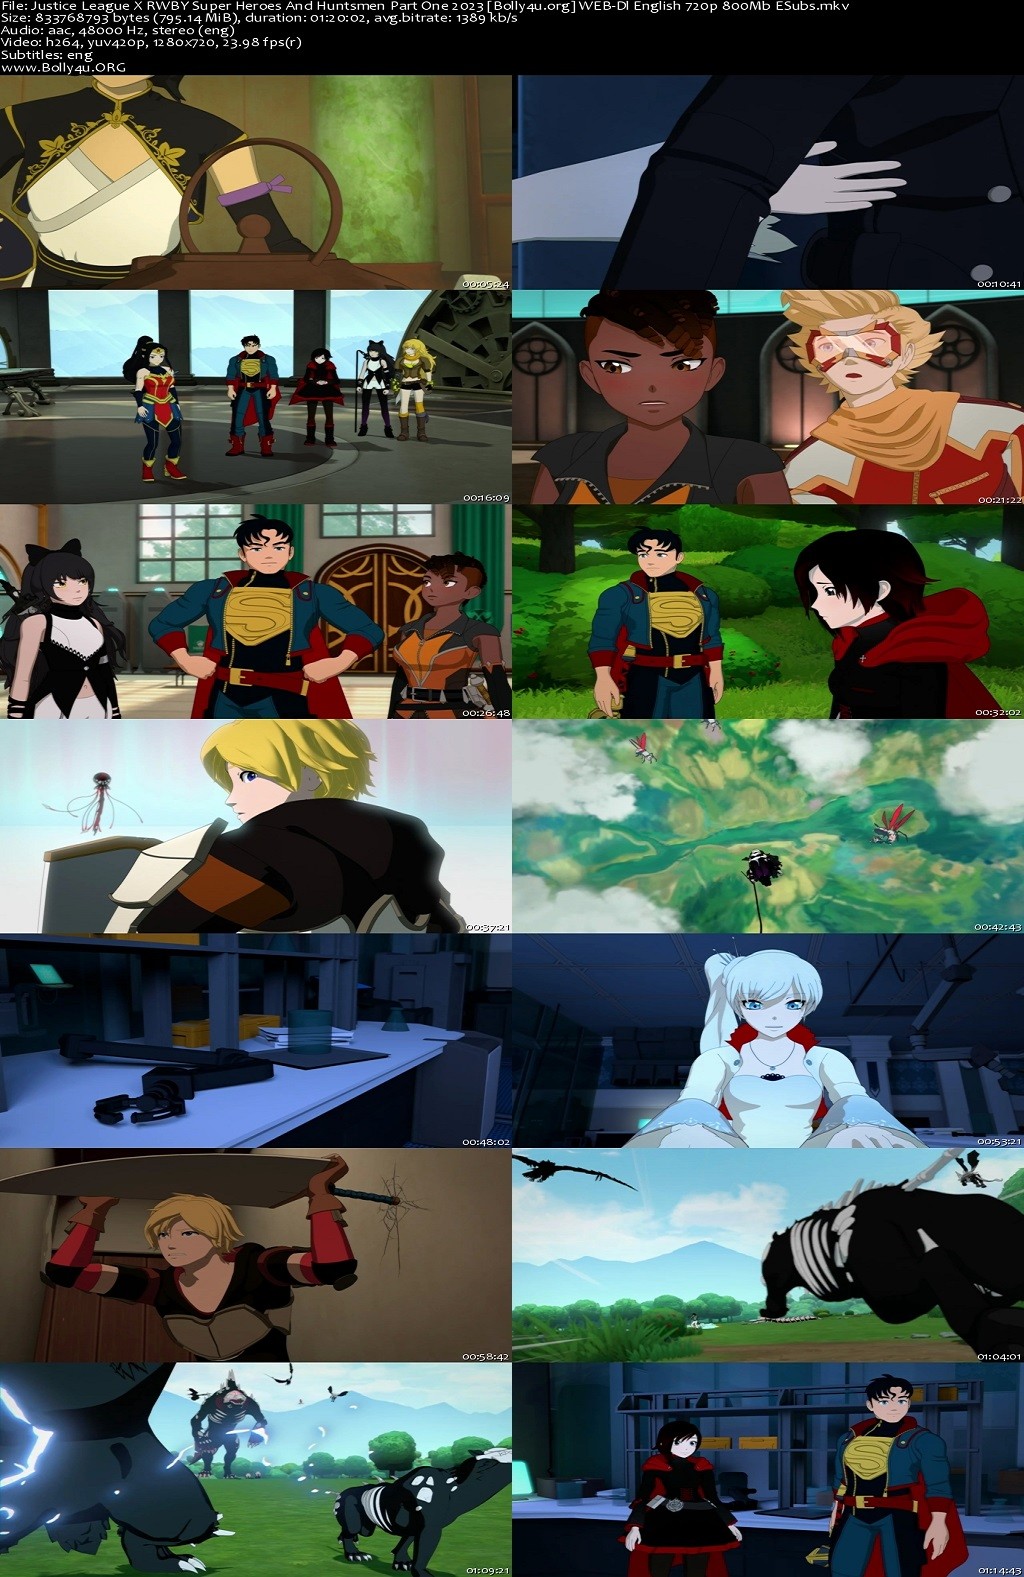 18+ Justice League X RWBY Super Heroes And Huntsmen Part One 2023 WEB-DL English Full Movie Download 720p 480p